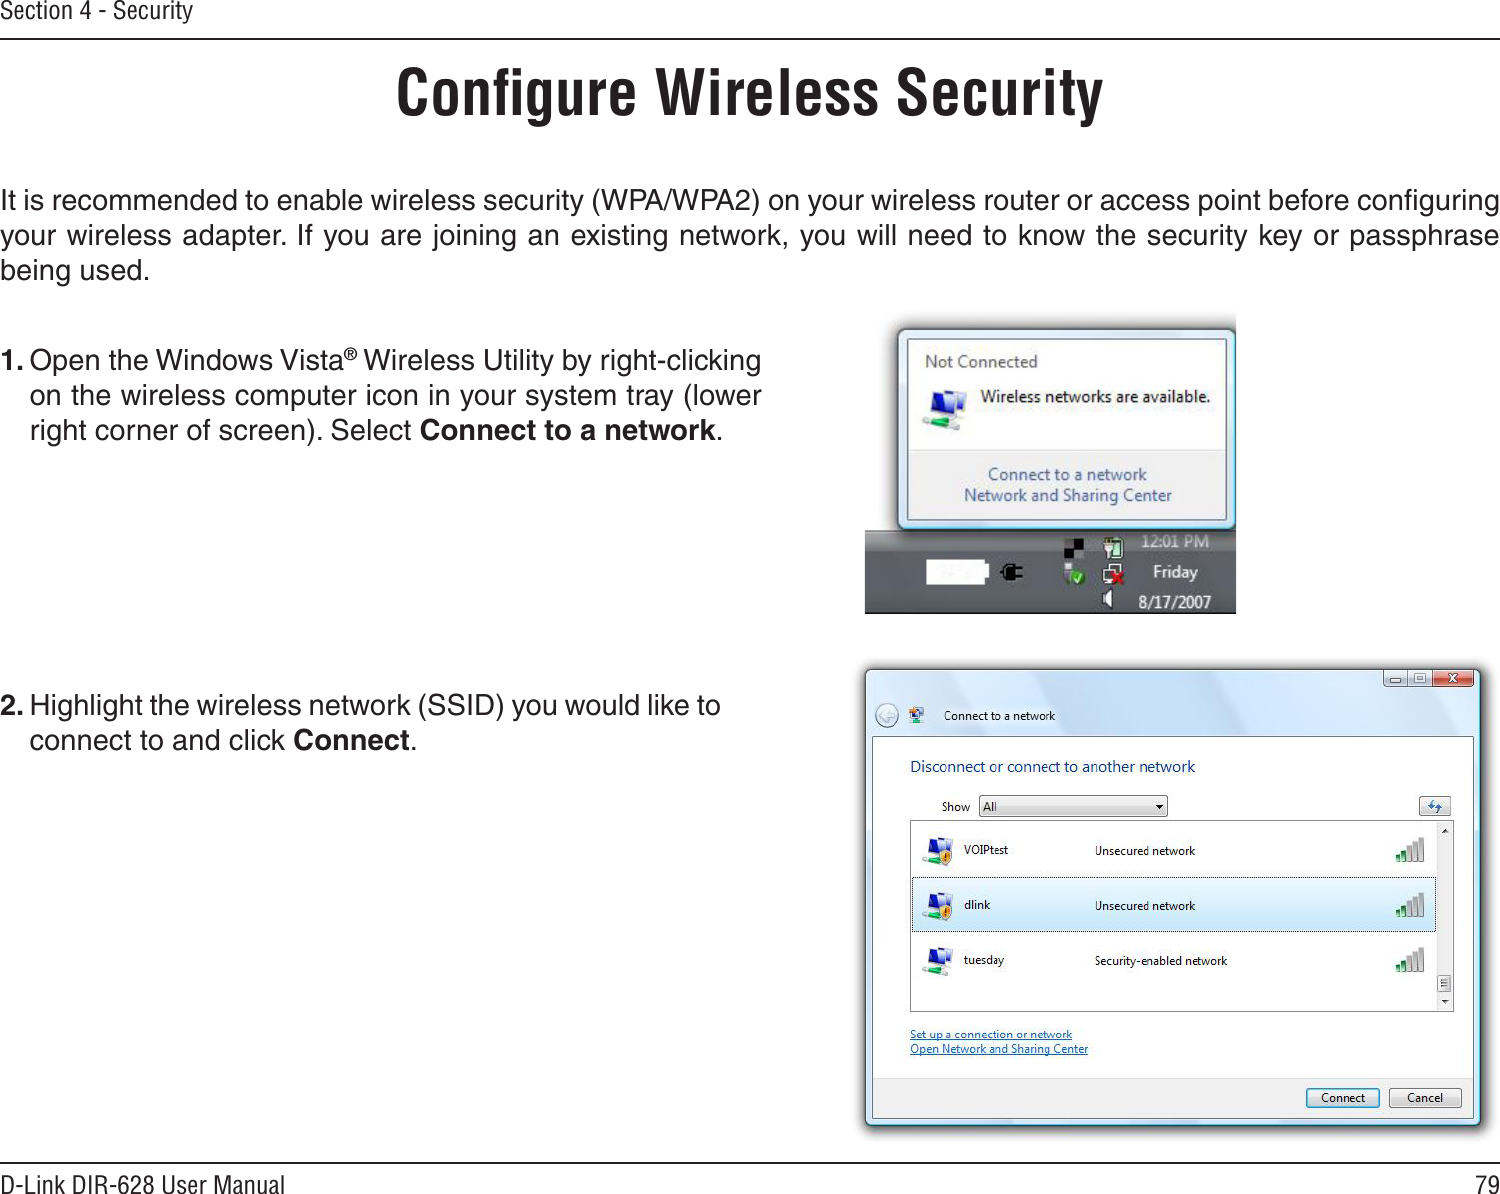 79D-Link DIR-628 User ManualSection 4 - SecurityConﬁgure Wireless SecurityIt is recommended to enable wireless security (WPA/WPA2) on your wireless router or access point before conﬁguring your wireless adapter. If you are joining an existing network, you will need to know the security key or passphrase being used.2. Highlight the wireless network (SSID) you would like to connect to and click Connect.1. Open the Windows Vista® Wireless Utility by right-clicking on the wireless computer icon in your system tray (lower right corner of screen). Select Connect to a network. 